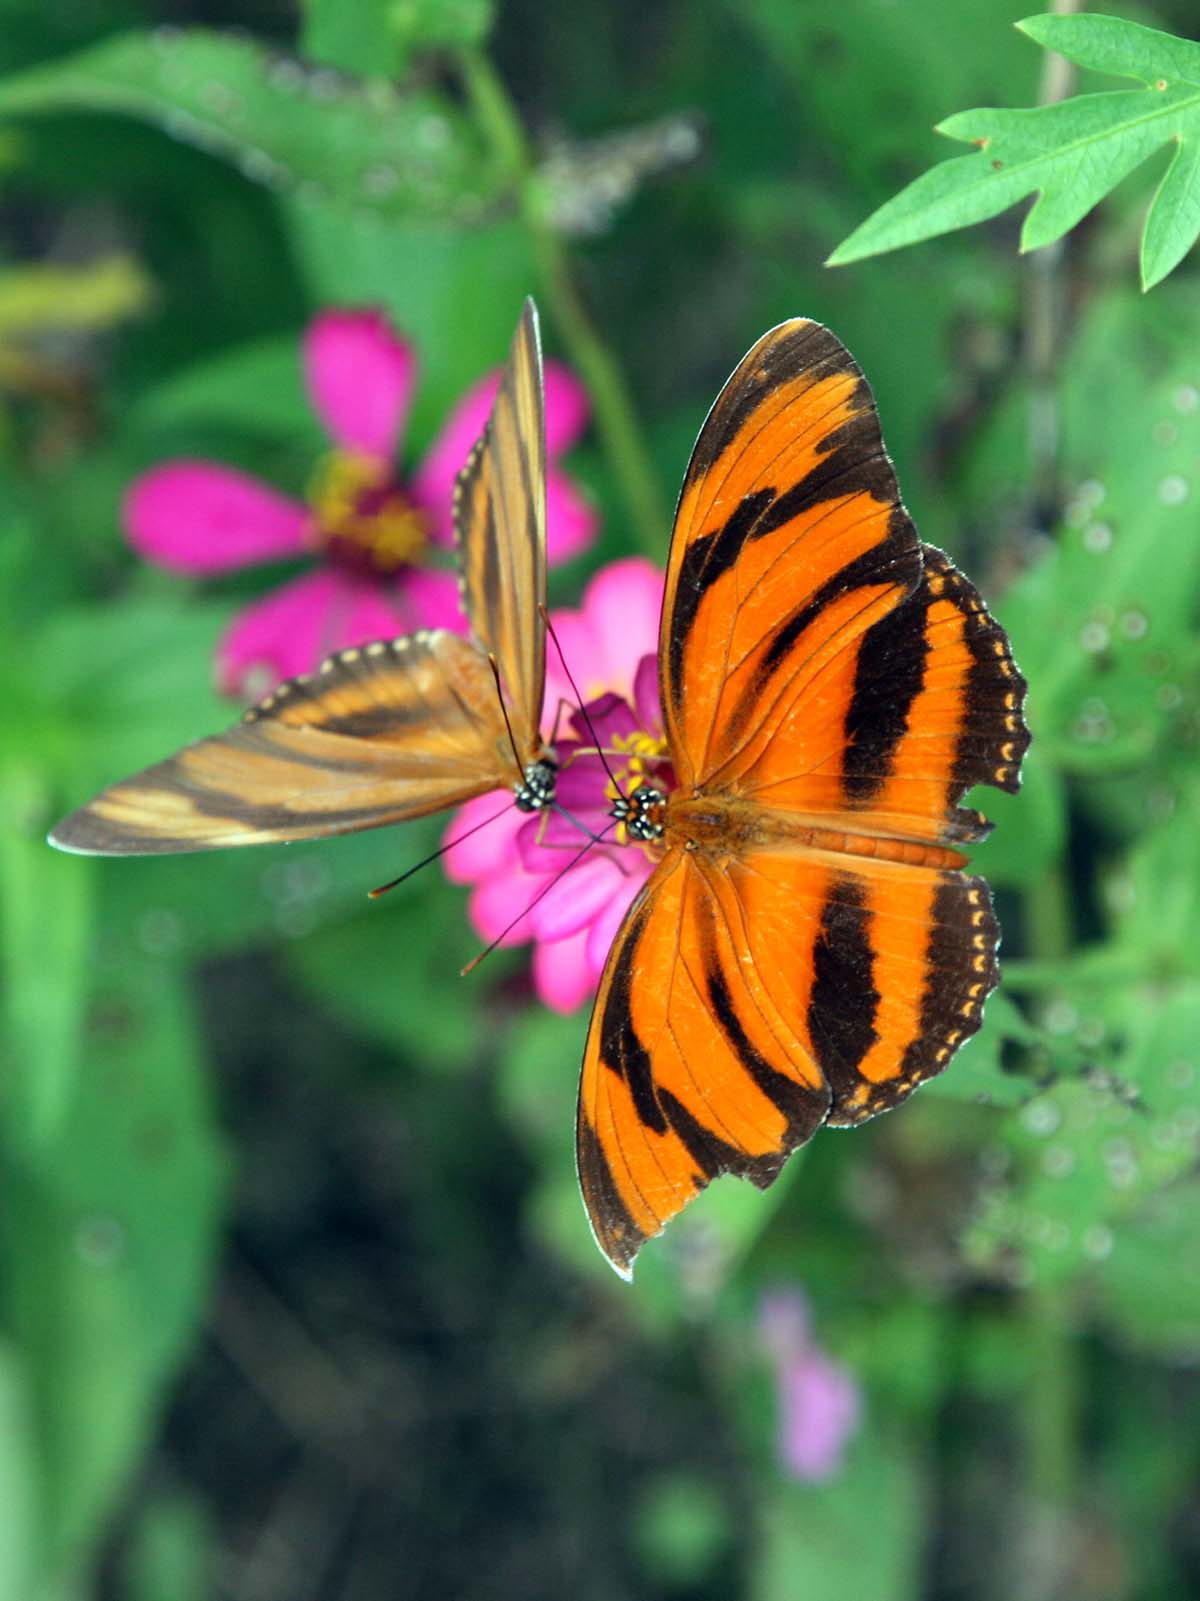 Two orange and black striped butterflies on a pink flower in the Peruvian rainforest.